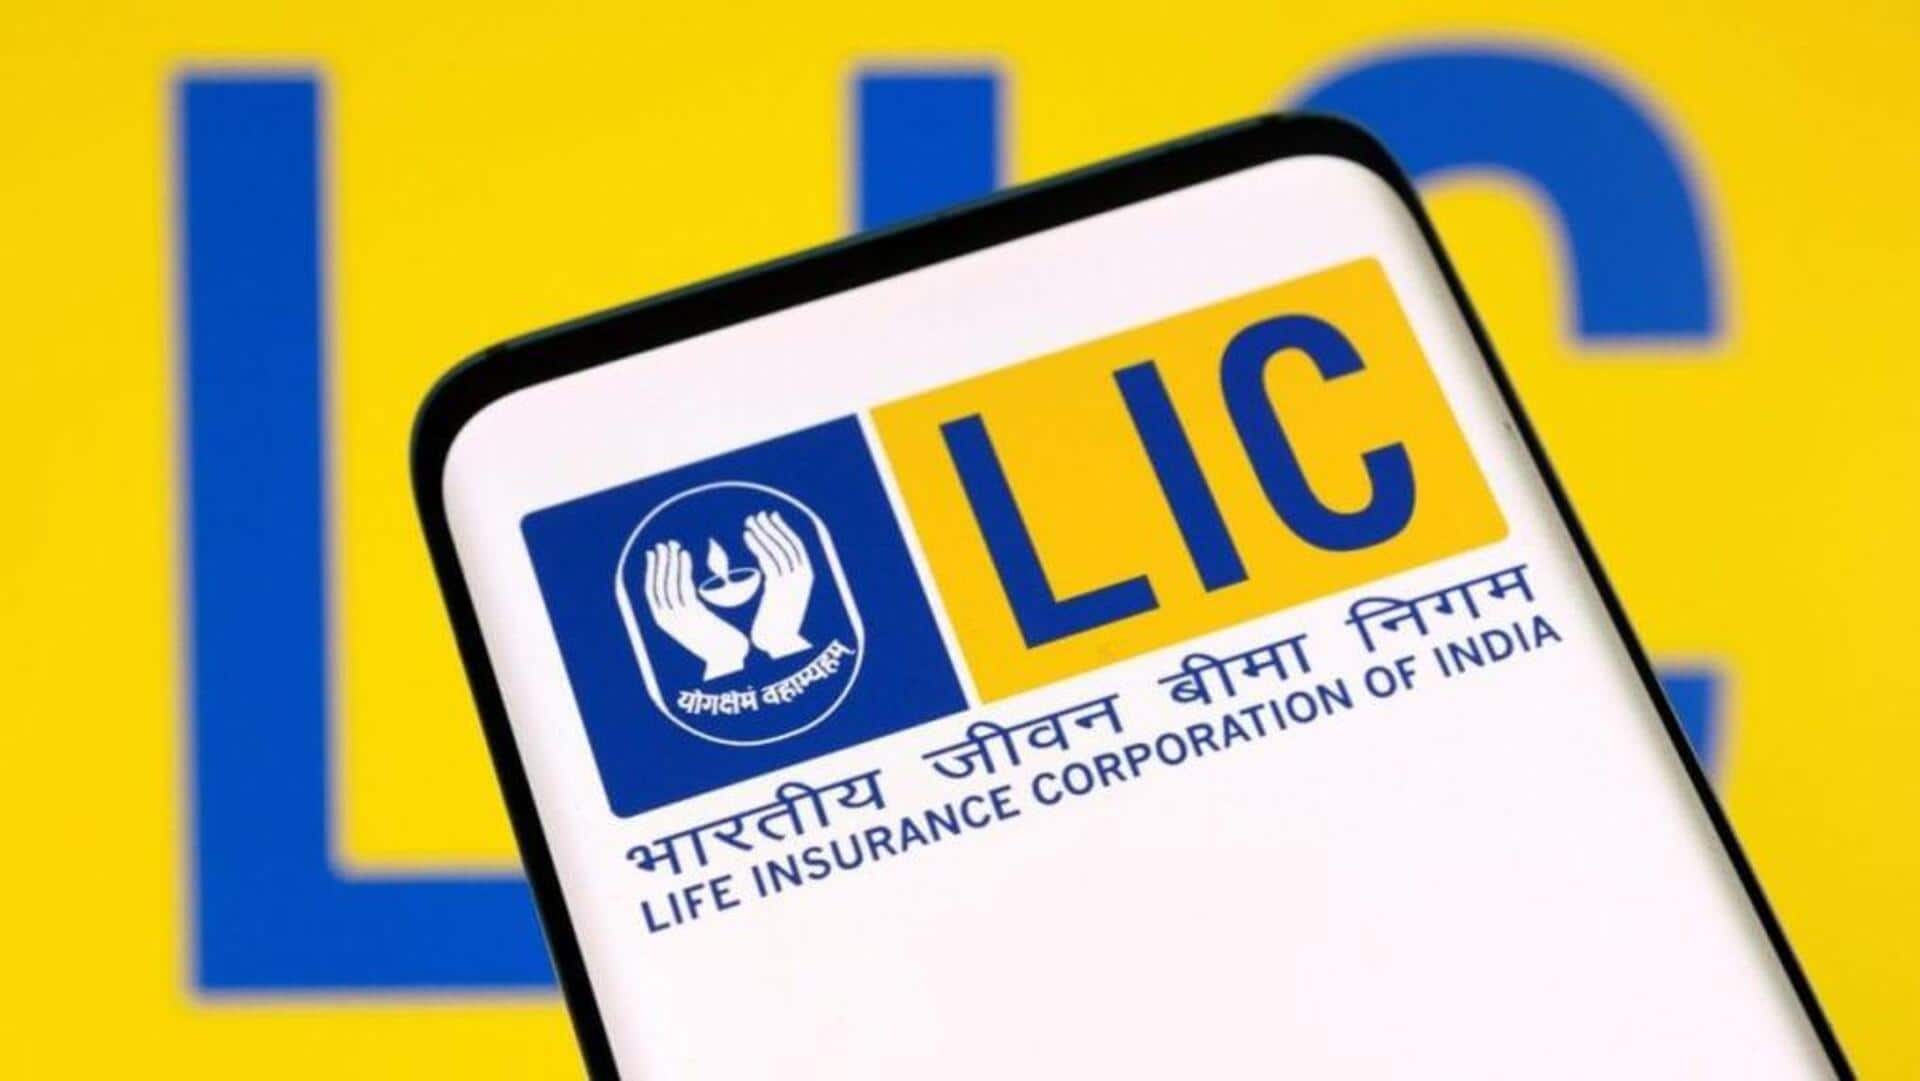 LIC's stock reaches highest-level since IPO: How it benefits investors?